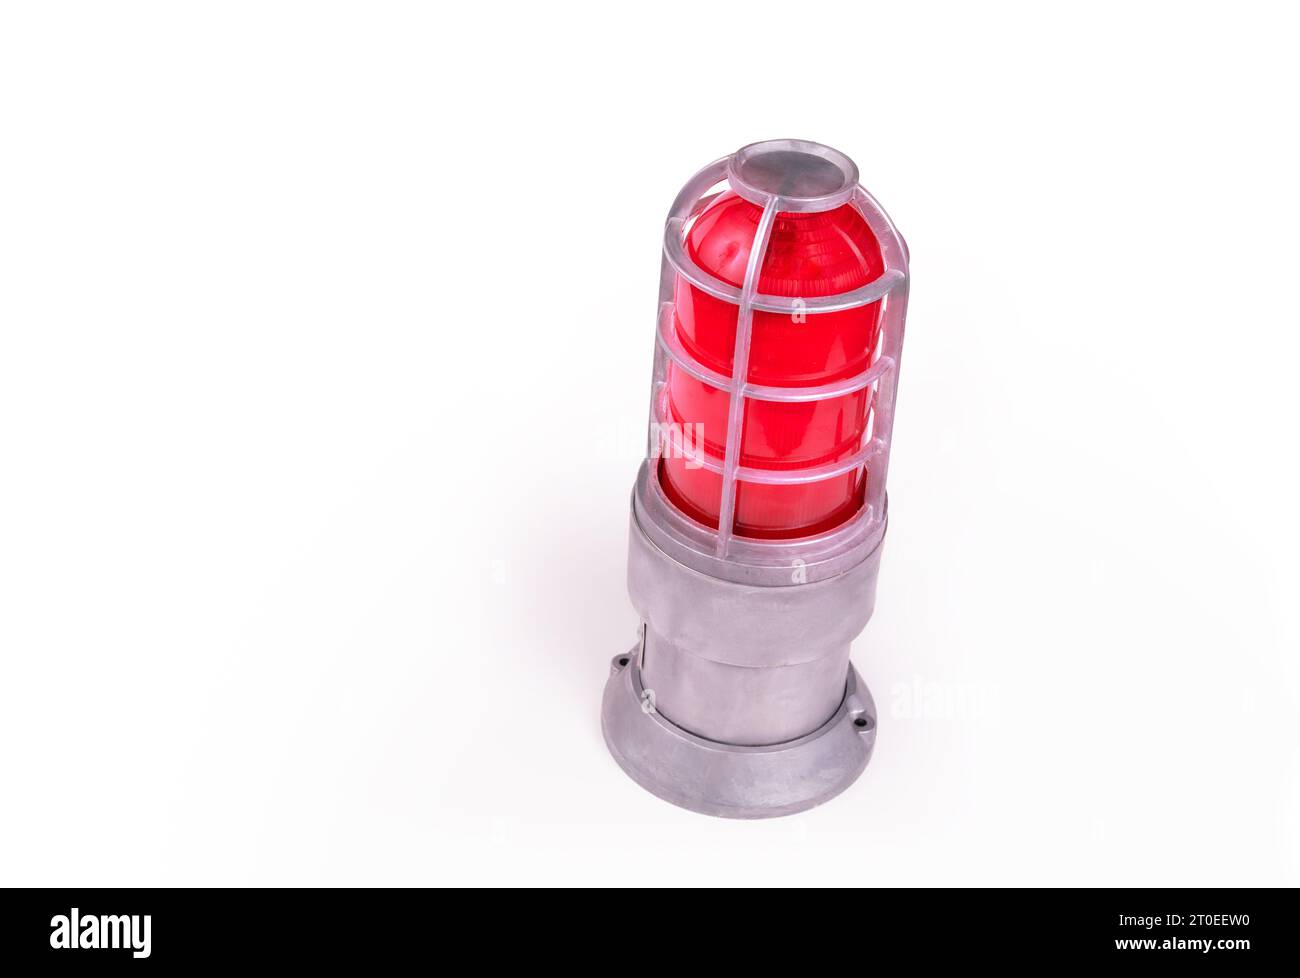 Isolated alarm siren with red glow. Perspective view of an emergency caution warning light or beacon flashing light with metal base. Copy space. Selec Stock Photo